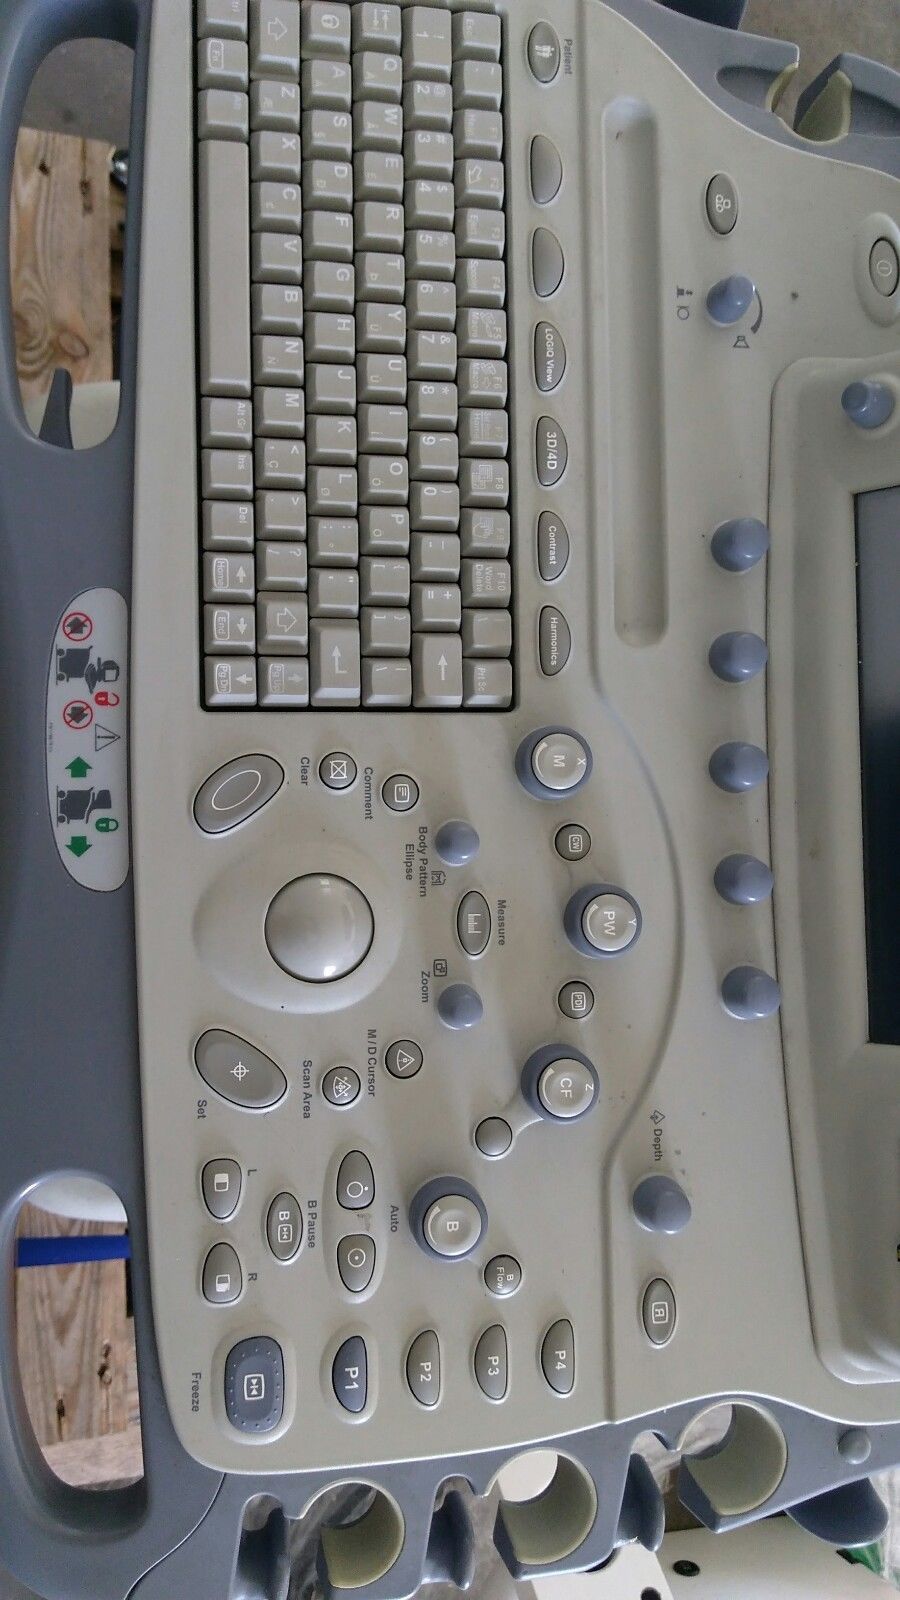 2008 GE Logiq 9 Ultrasound System with Flat screen Monitor. With 4c Transducer